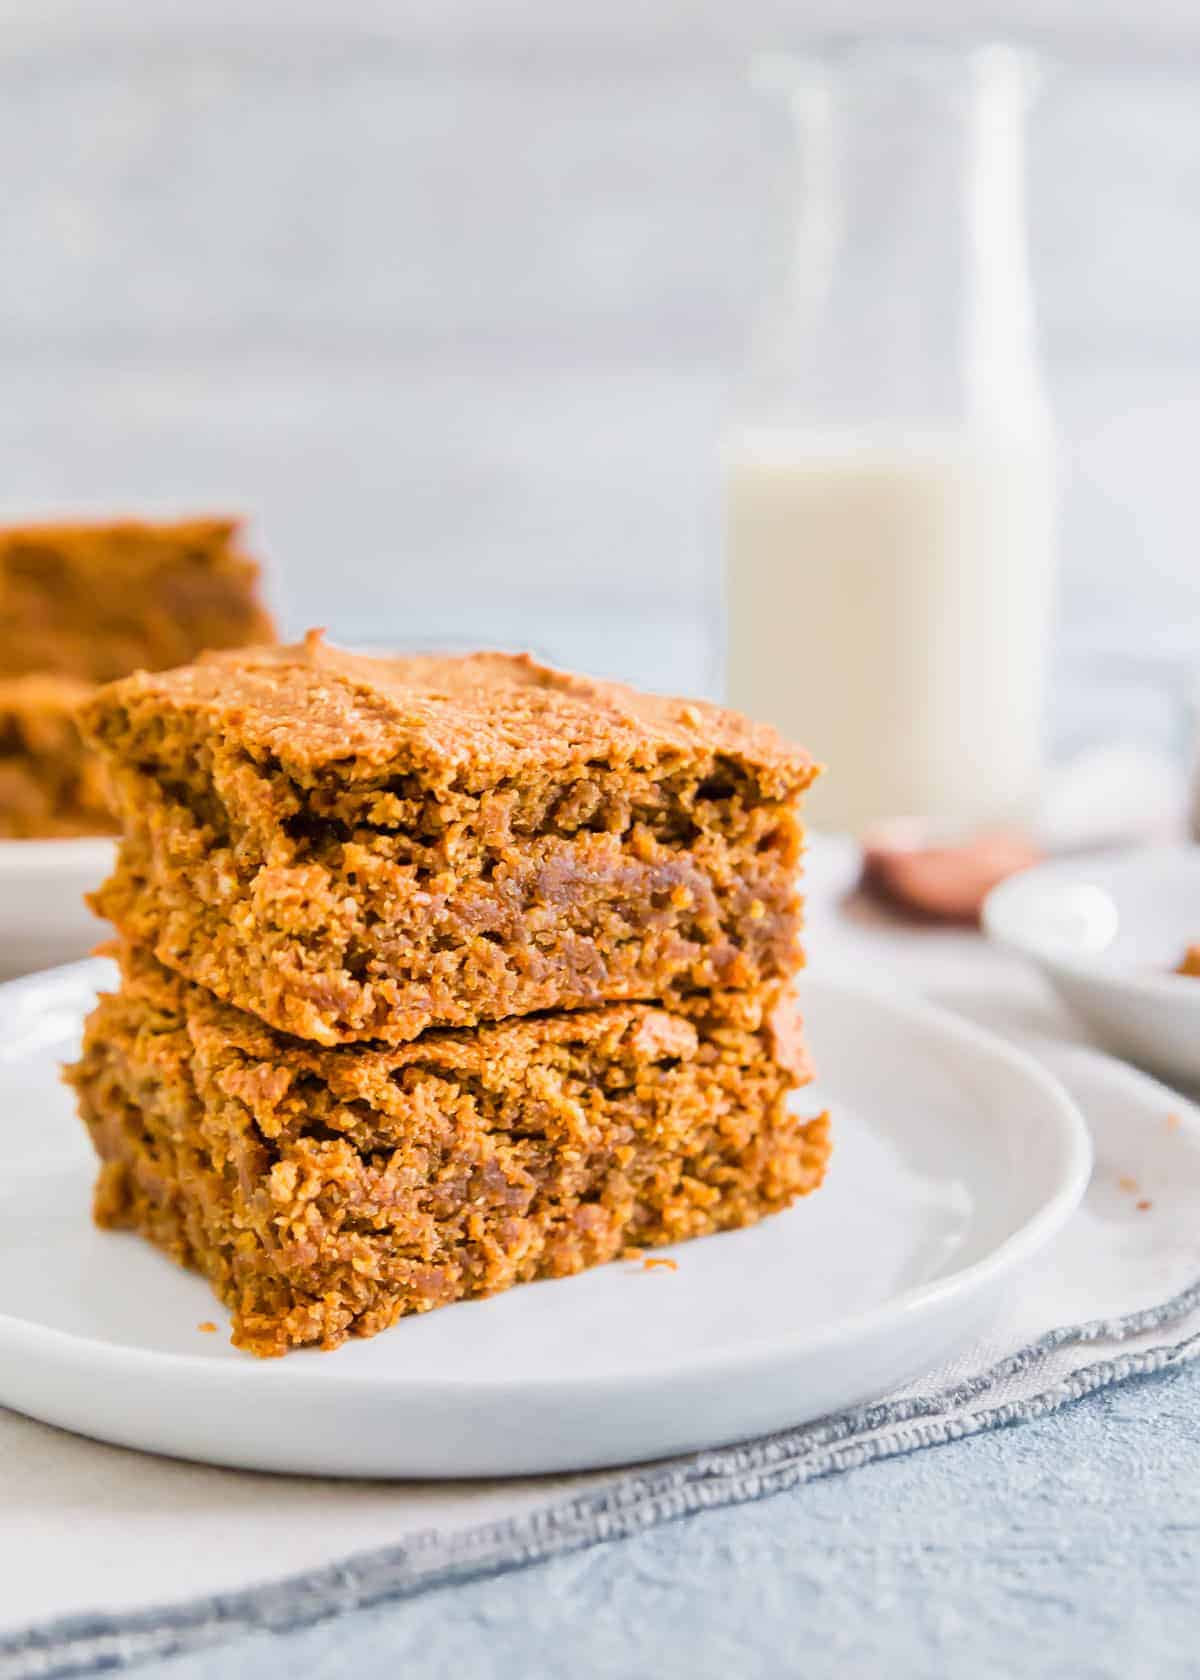 Moist, cake-like pumpkin bars that are gluten-free and vegan! Packed with fall spices to make a delicious afternoon snack or dessert.